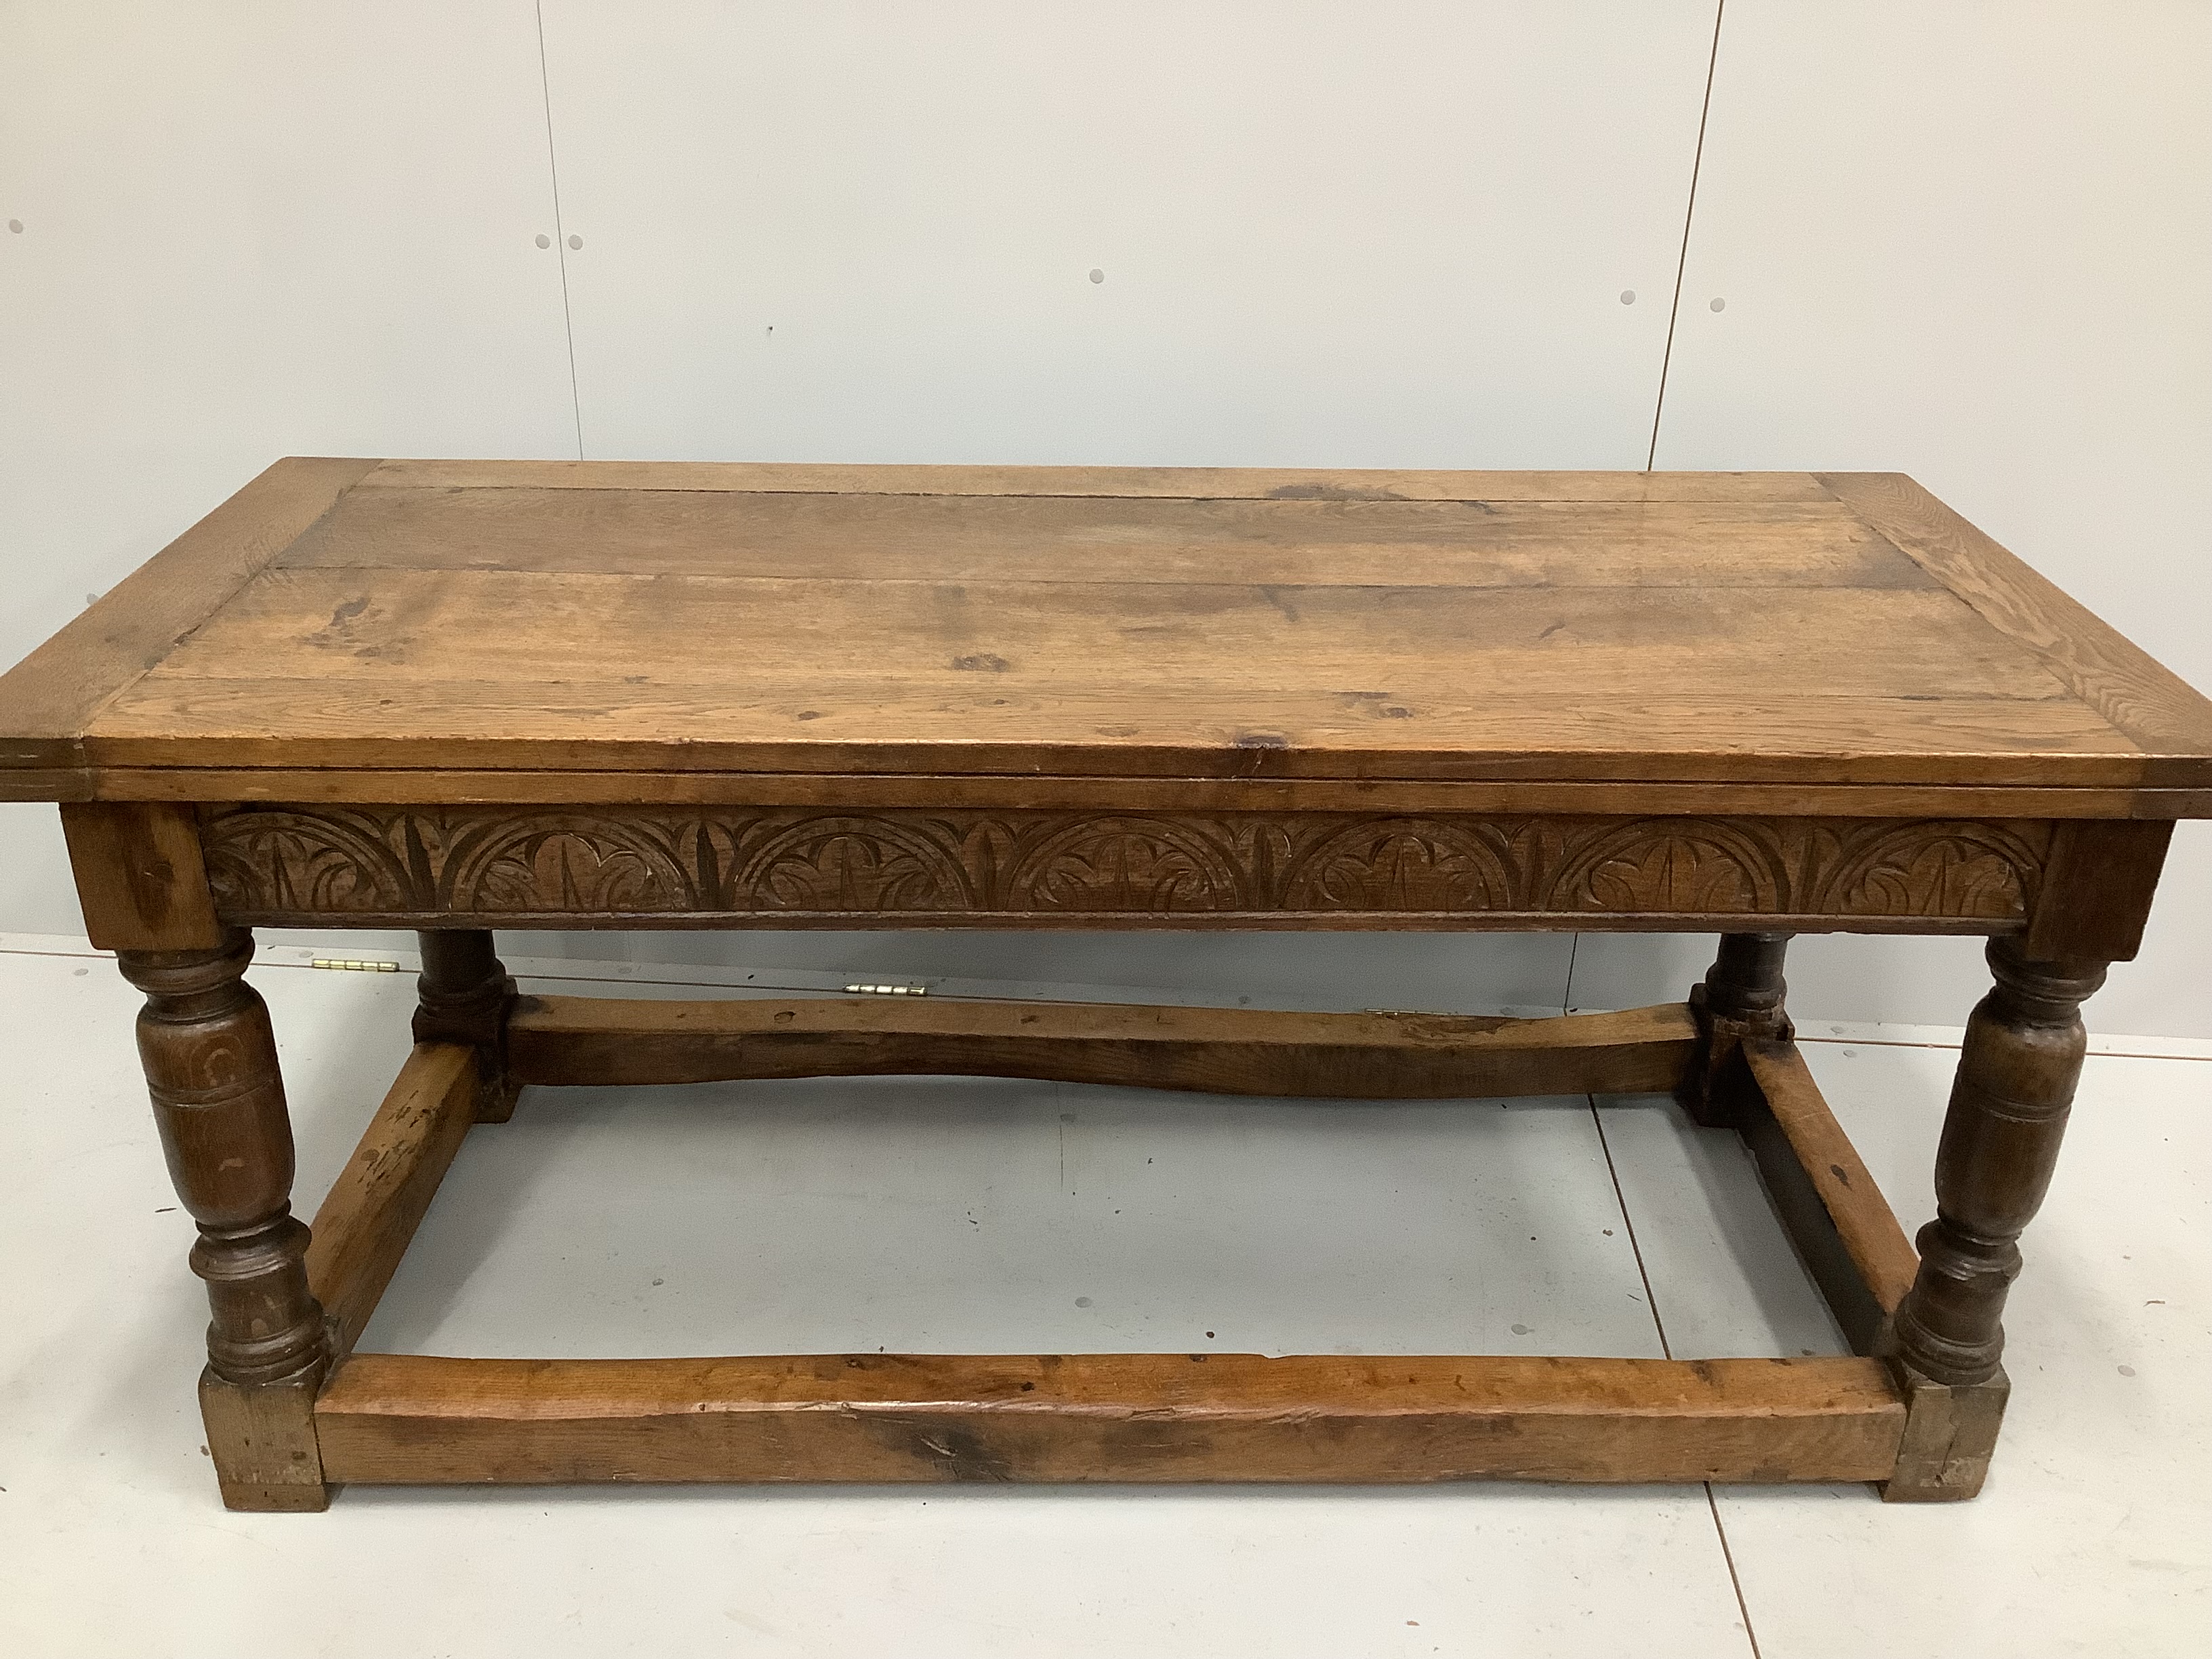 A 17th century style rectangular oak refectory dining table, incorporates old timber, width 168cm, depth 73cm, height 73cm